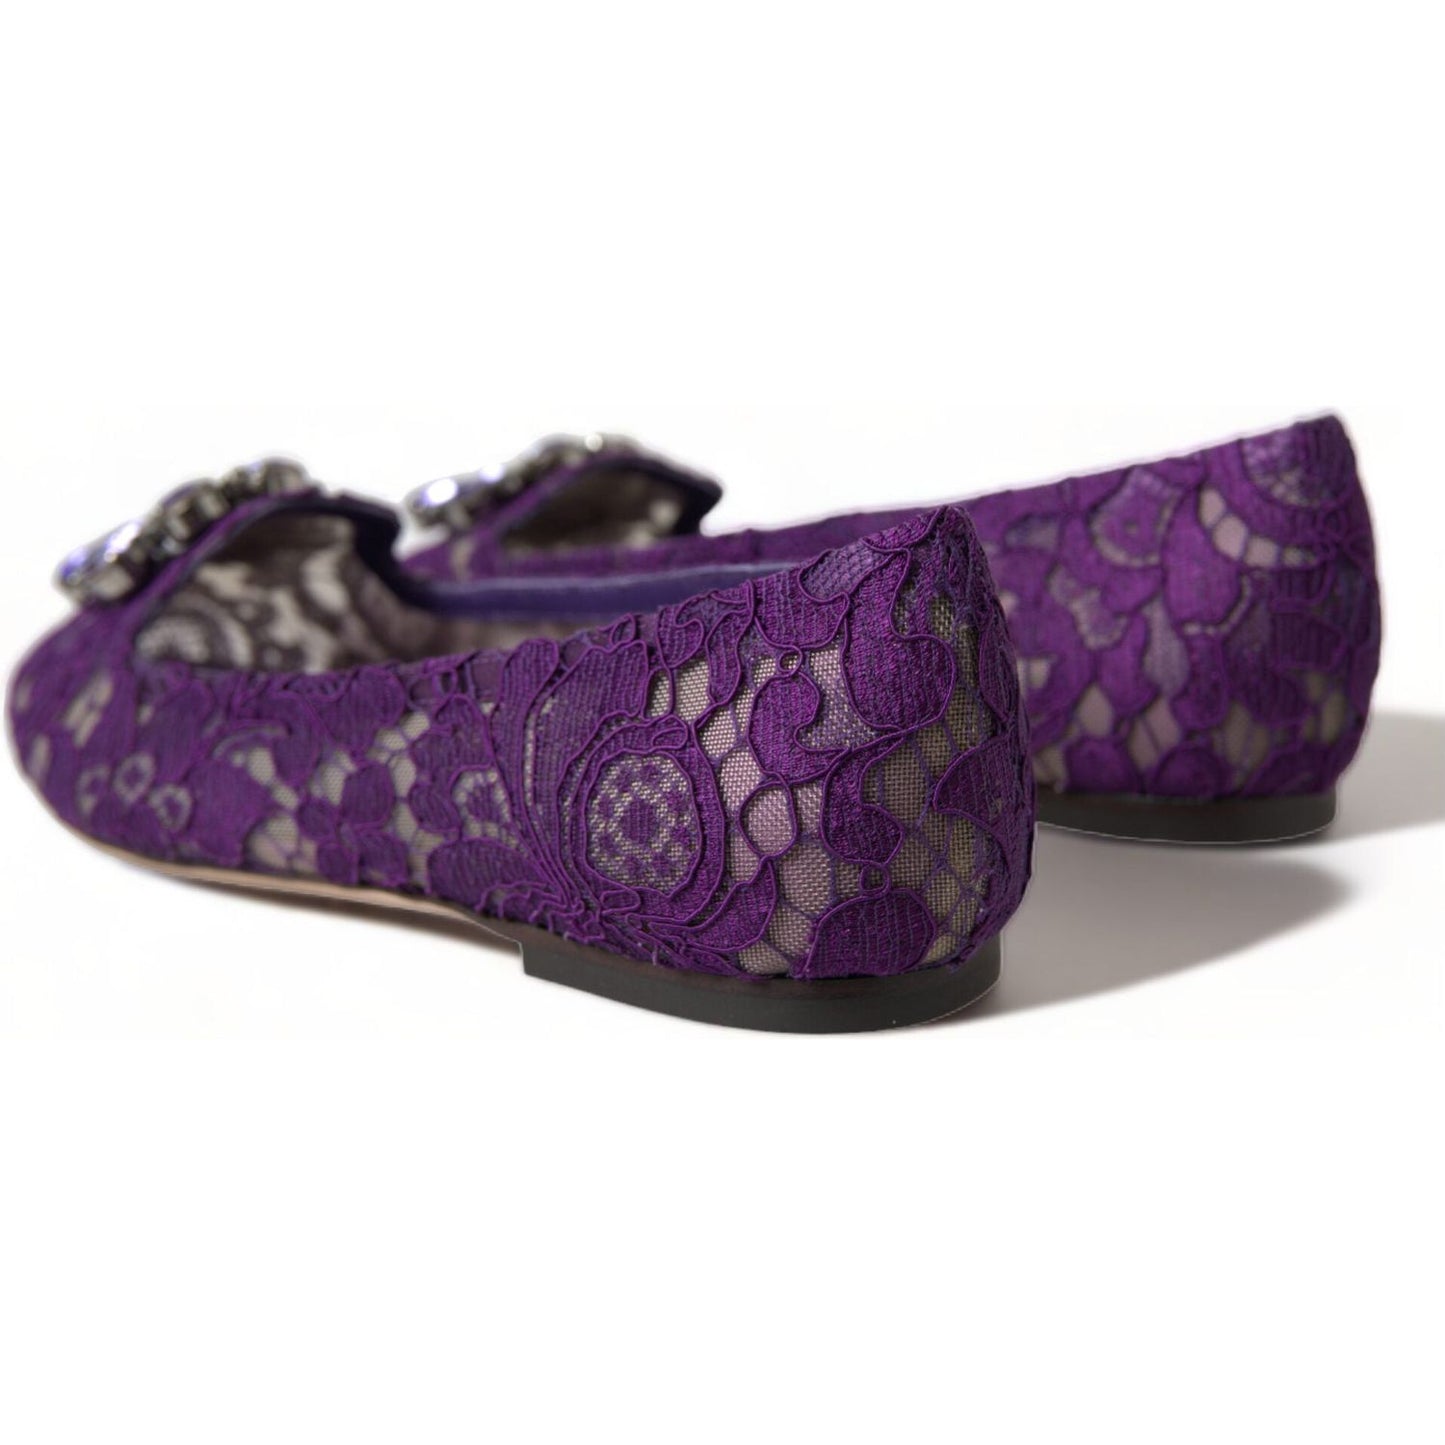 Dolce & Gabbana Elegant Floral Lace Vally Flat Shoes purple-vally-taormina-lace-crystals-flats-shoes 465A9041-bg-scaled-8e994836-788.jpg